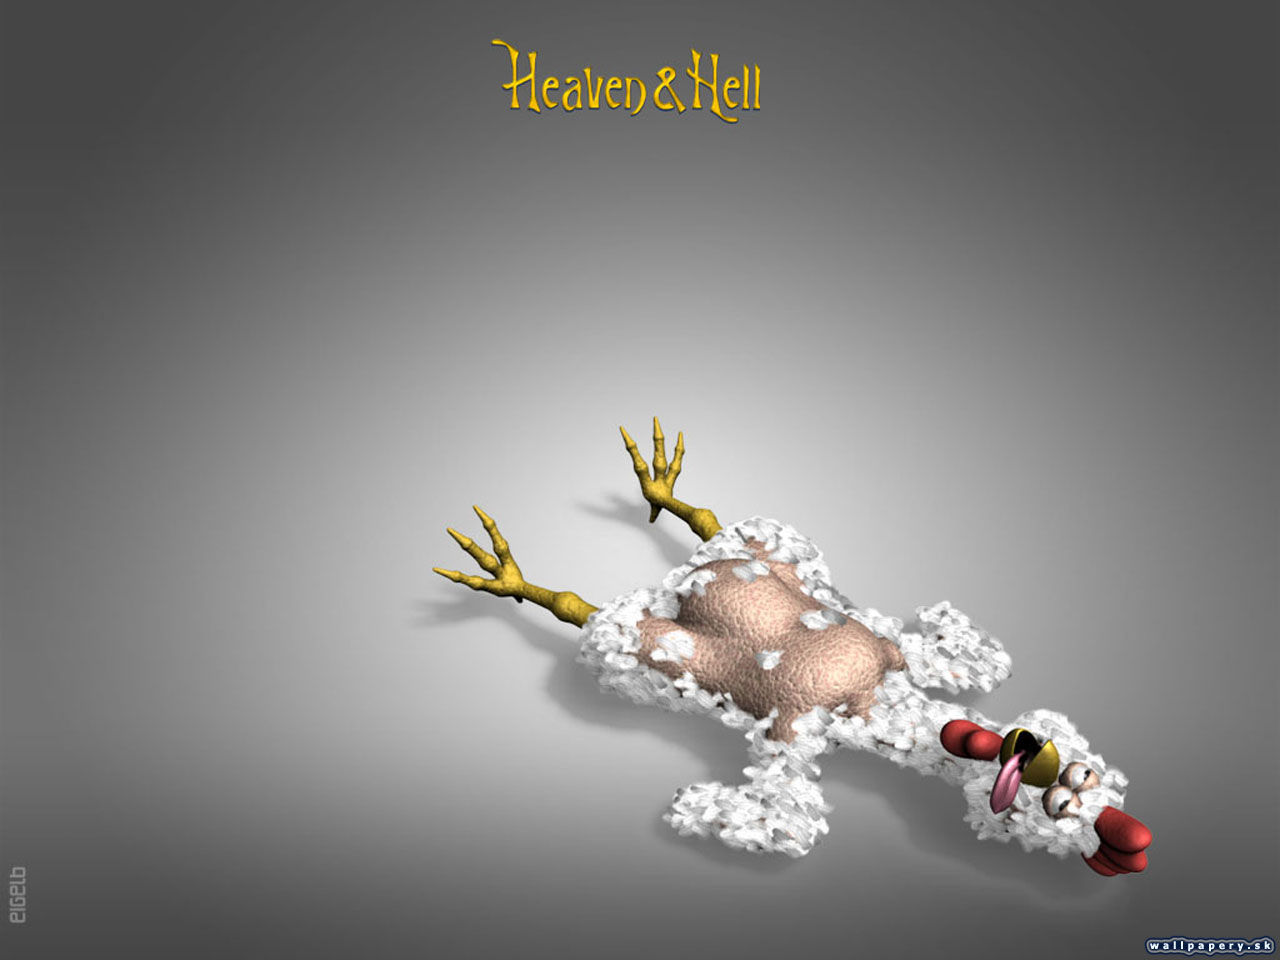 Heaven and Hell - wallpaper 3